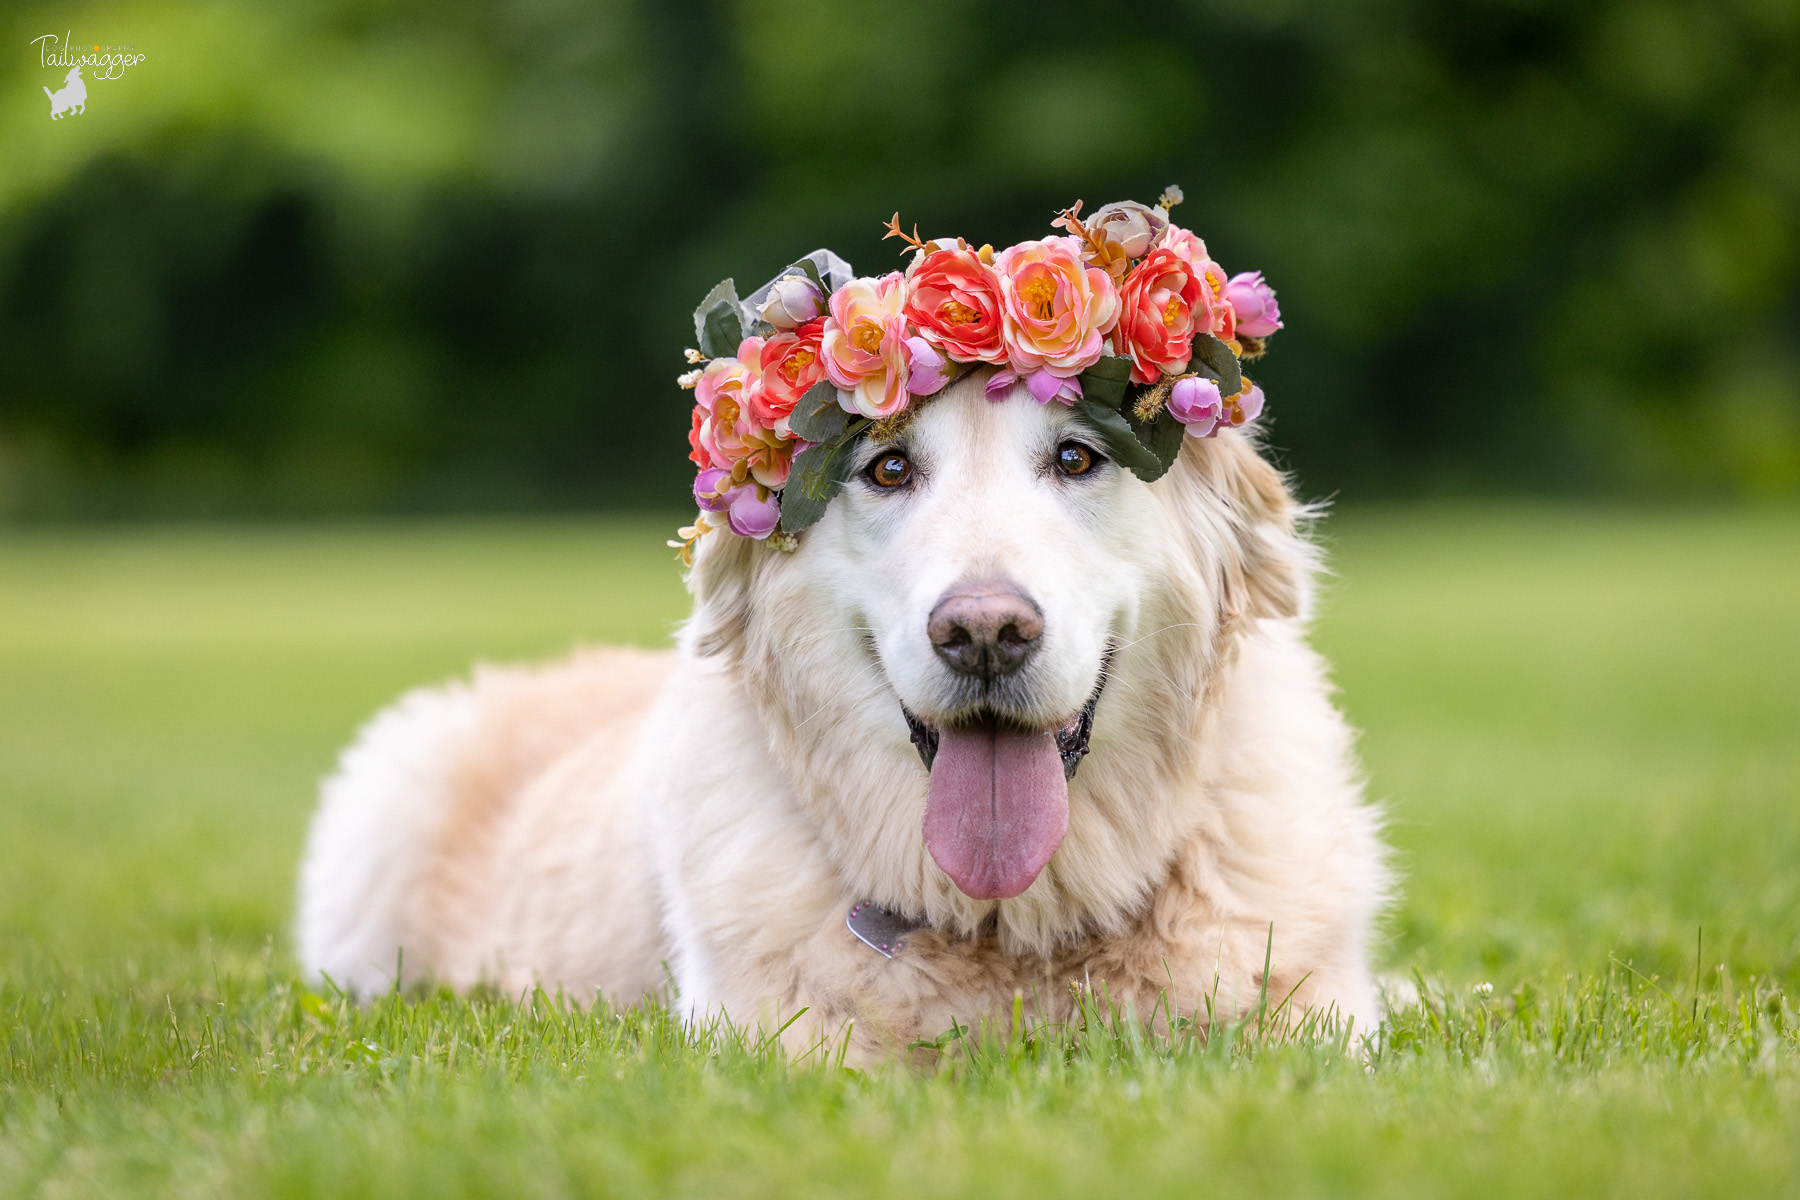 A female Golden Retriever lies in the grass with a flower crown on her head at Johnson Park in grand Rapids, MI.